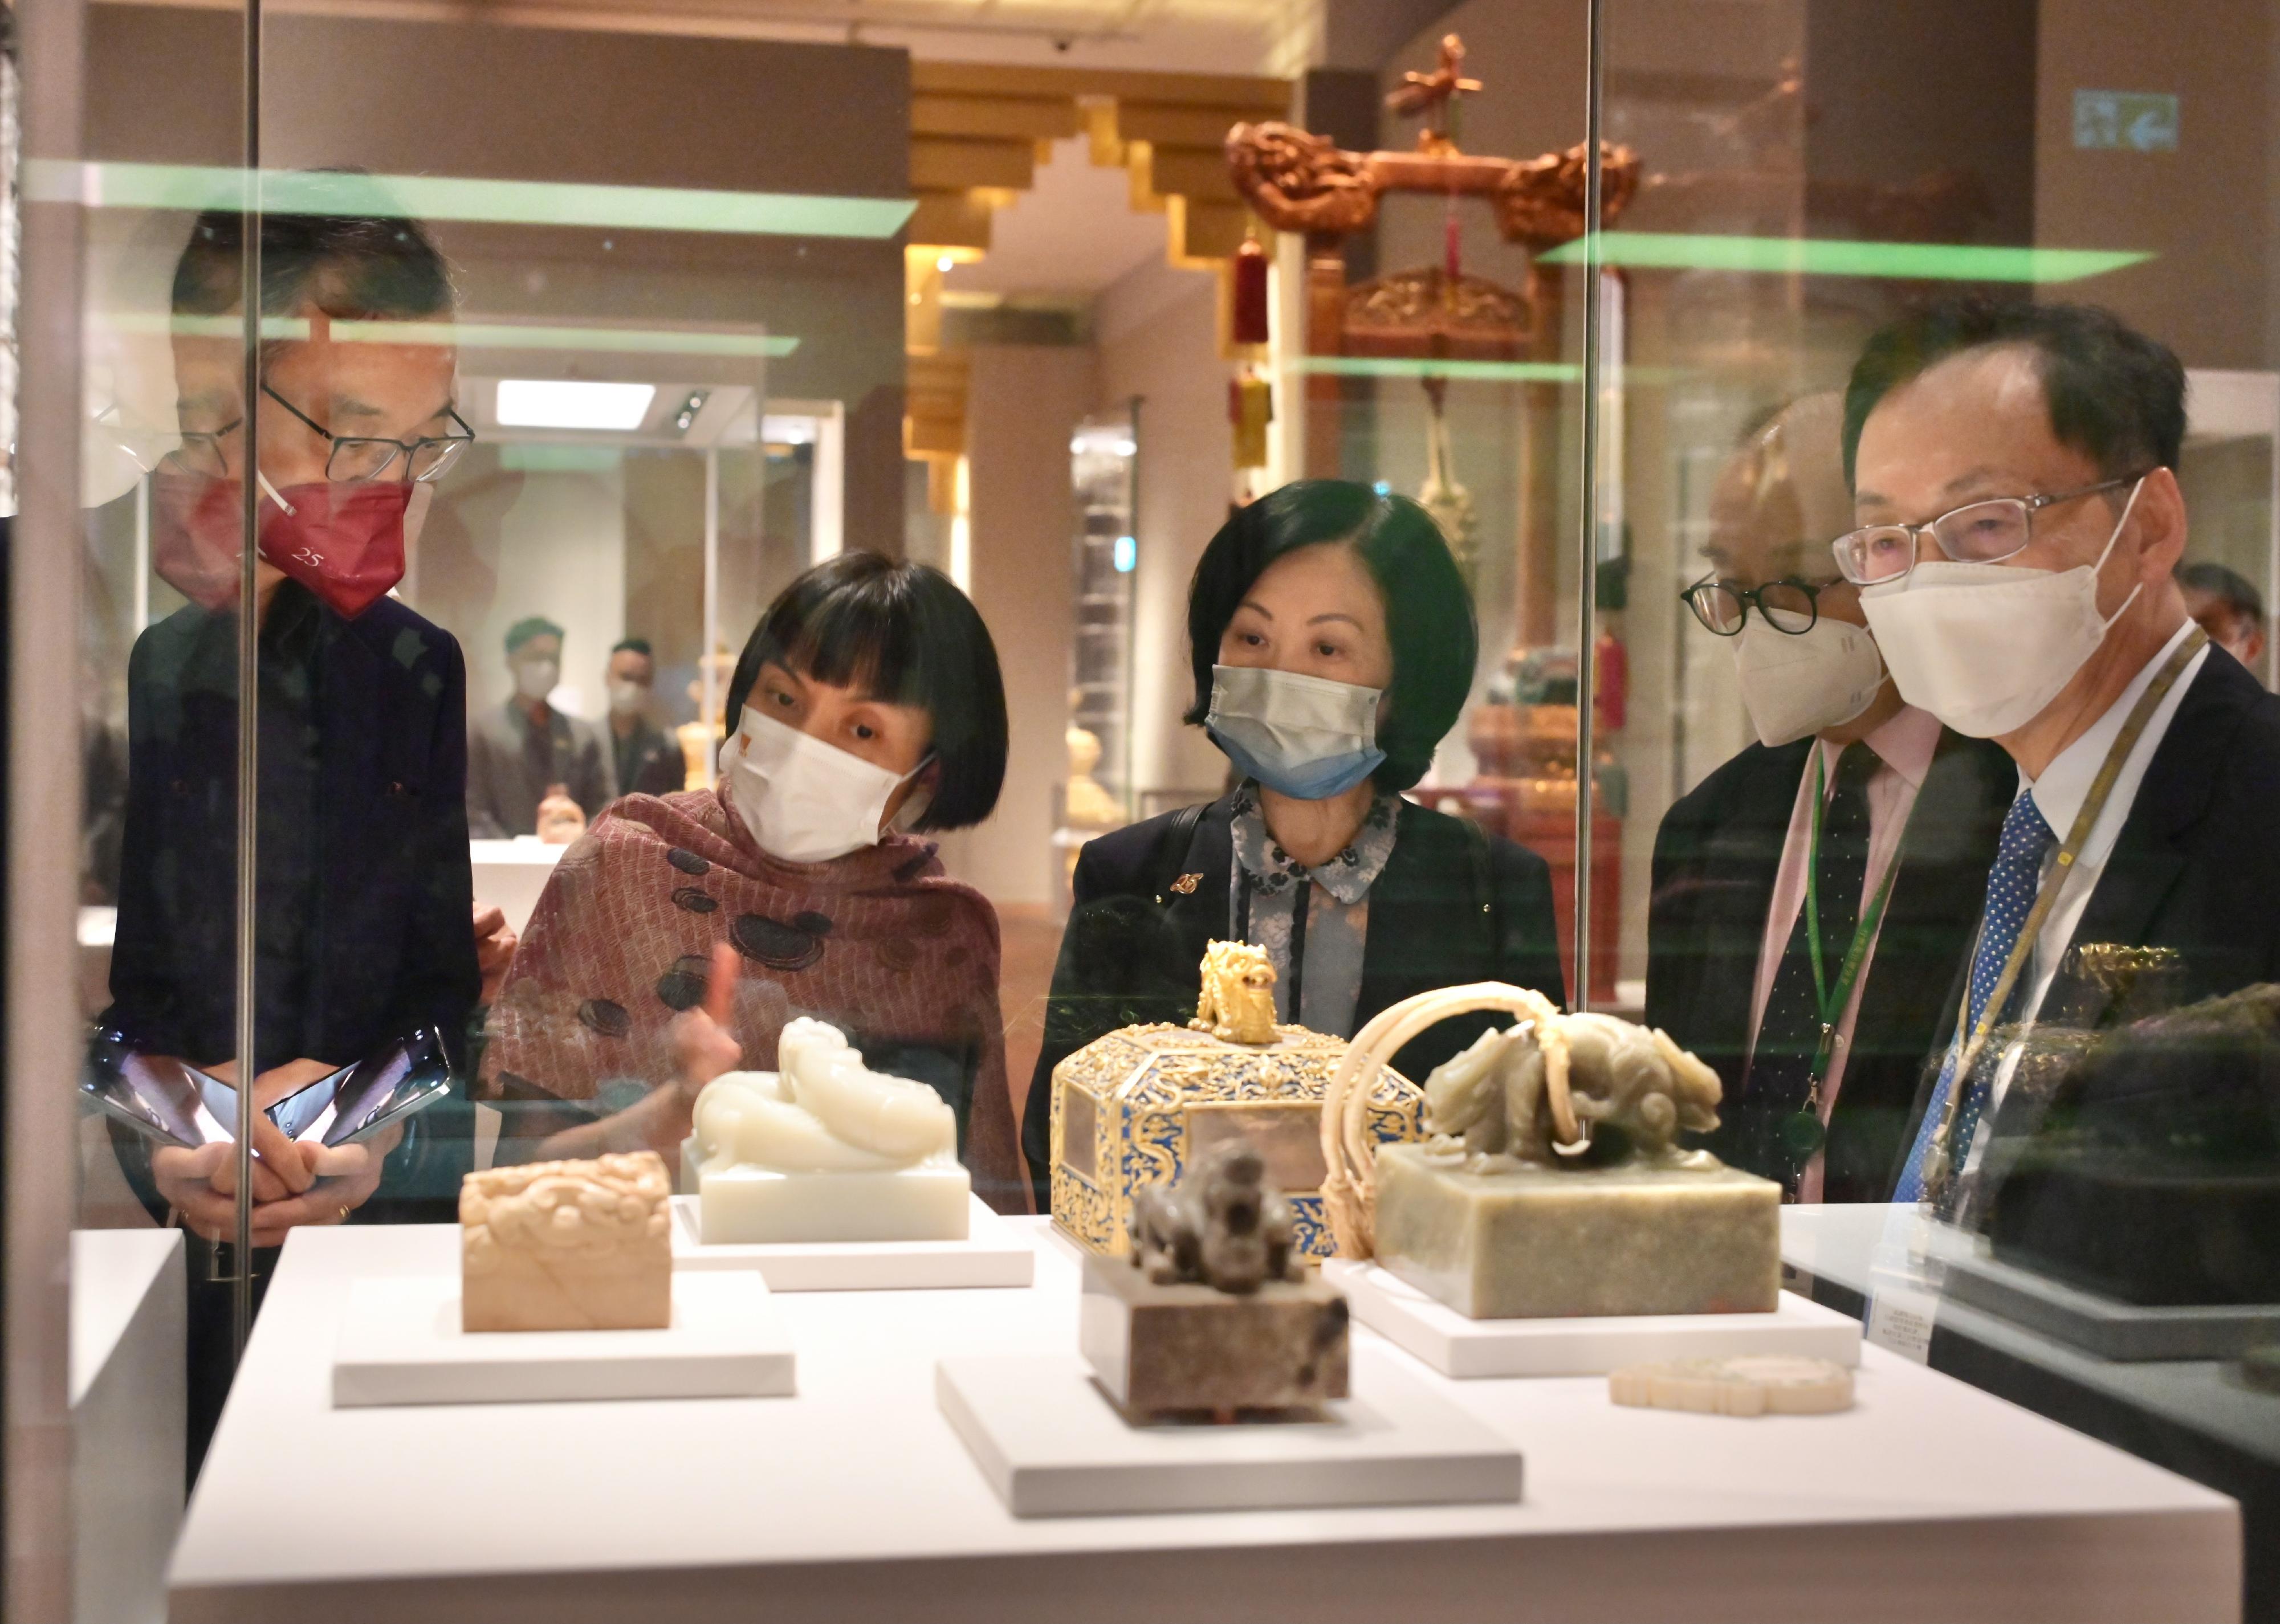 The Non-official Members of the Executive Council today (July 20) visit the Hong Kong Palace Museum at the West Kowloon Cultural District.